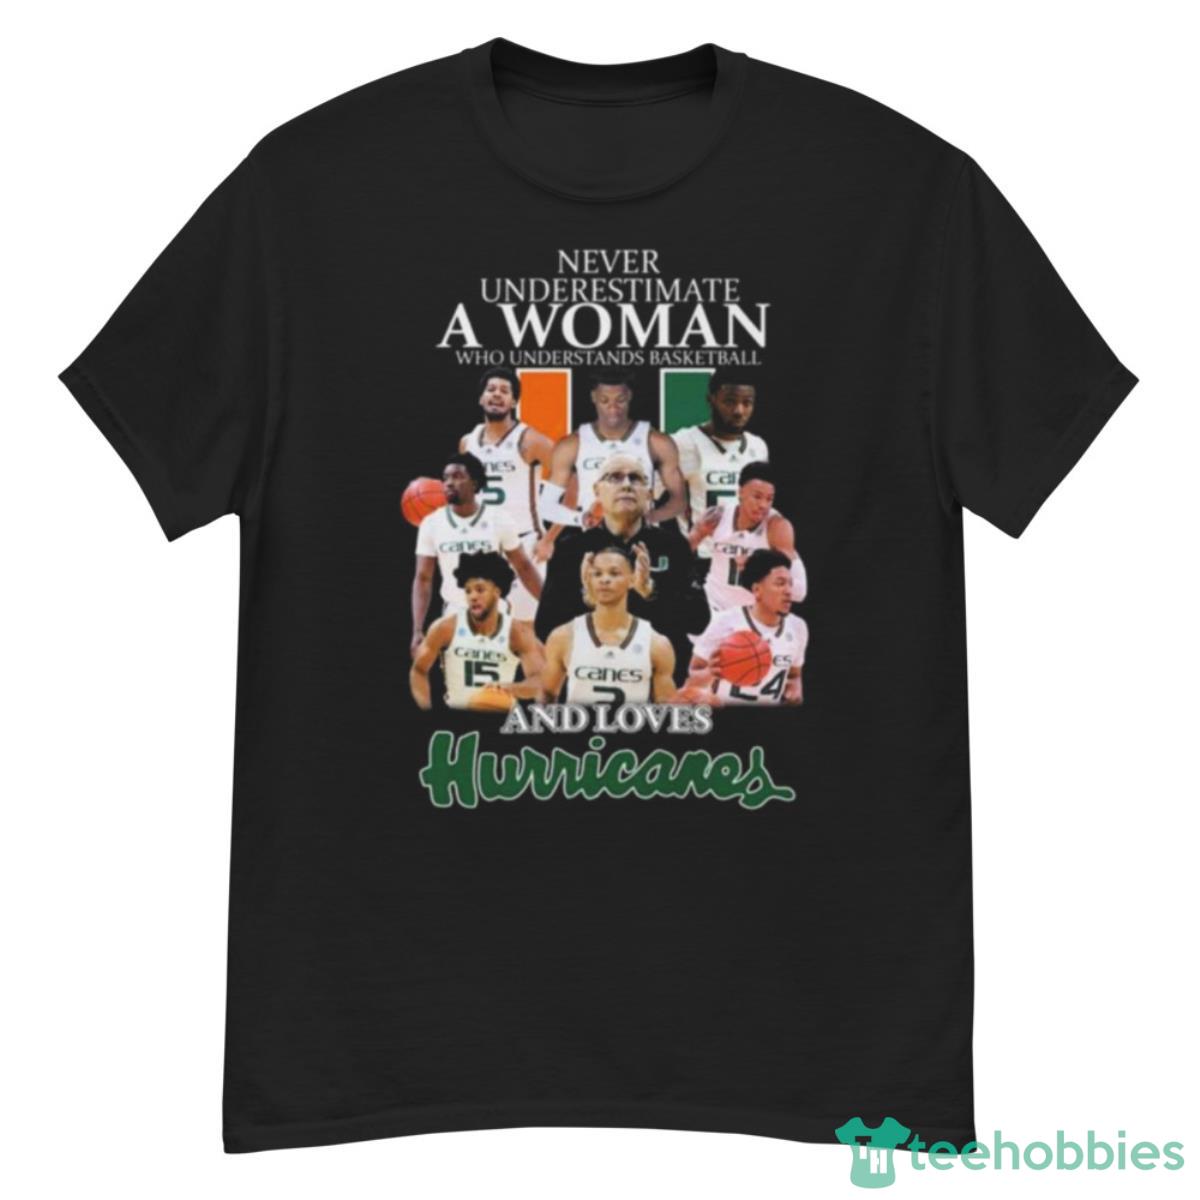 2023 Never Underestimate A Woman Who Understands Basketball And Loves Miami Hurricanes Shirt - G500 Men’s Classic T-Shirt